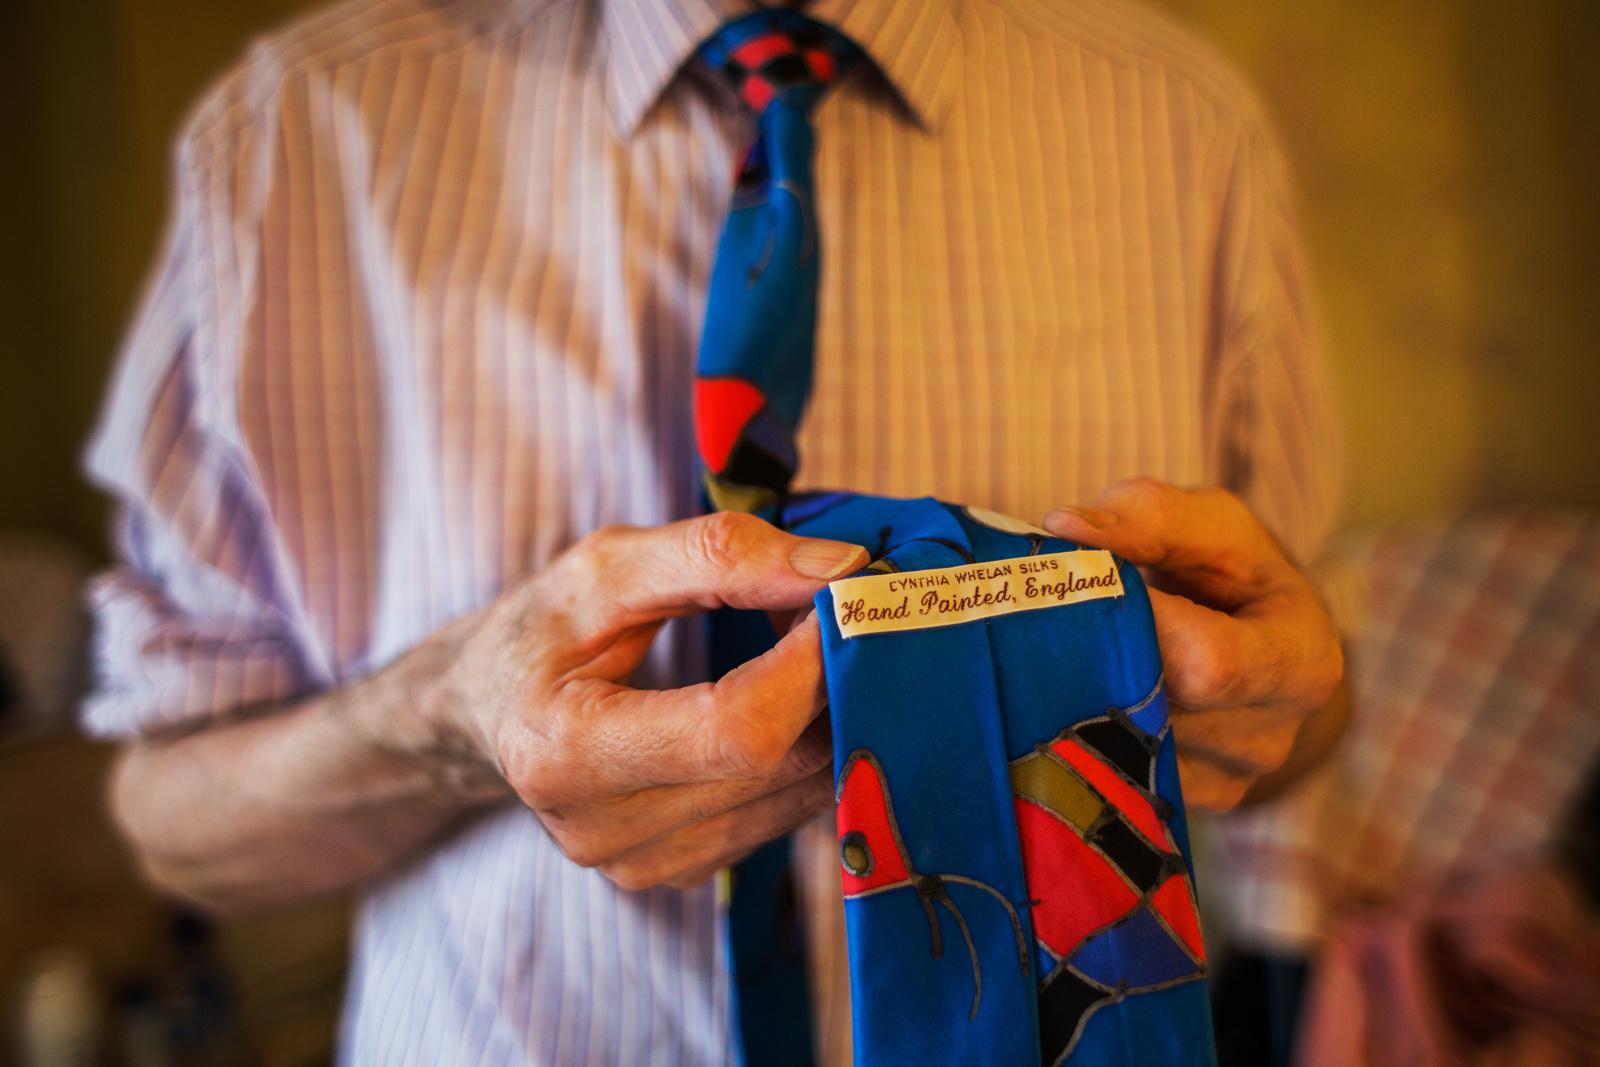 LONDON, UNITED KINGDOM - MARCH 28, 2013: George shoes the label of his tie that he bought for a...